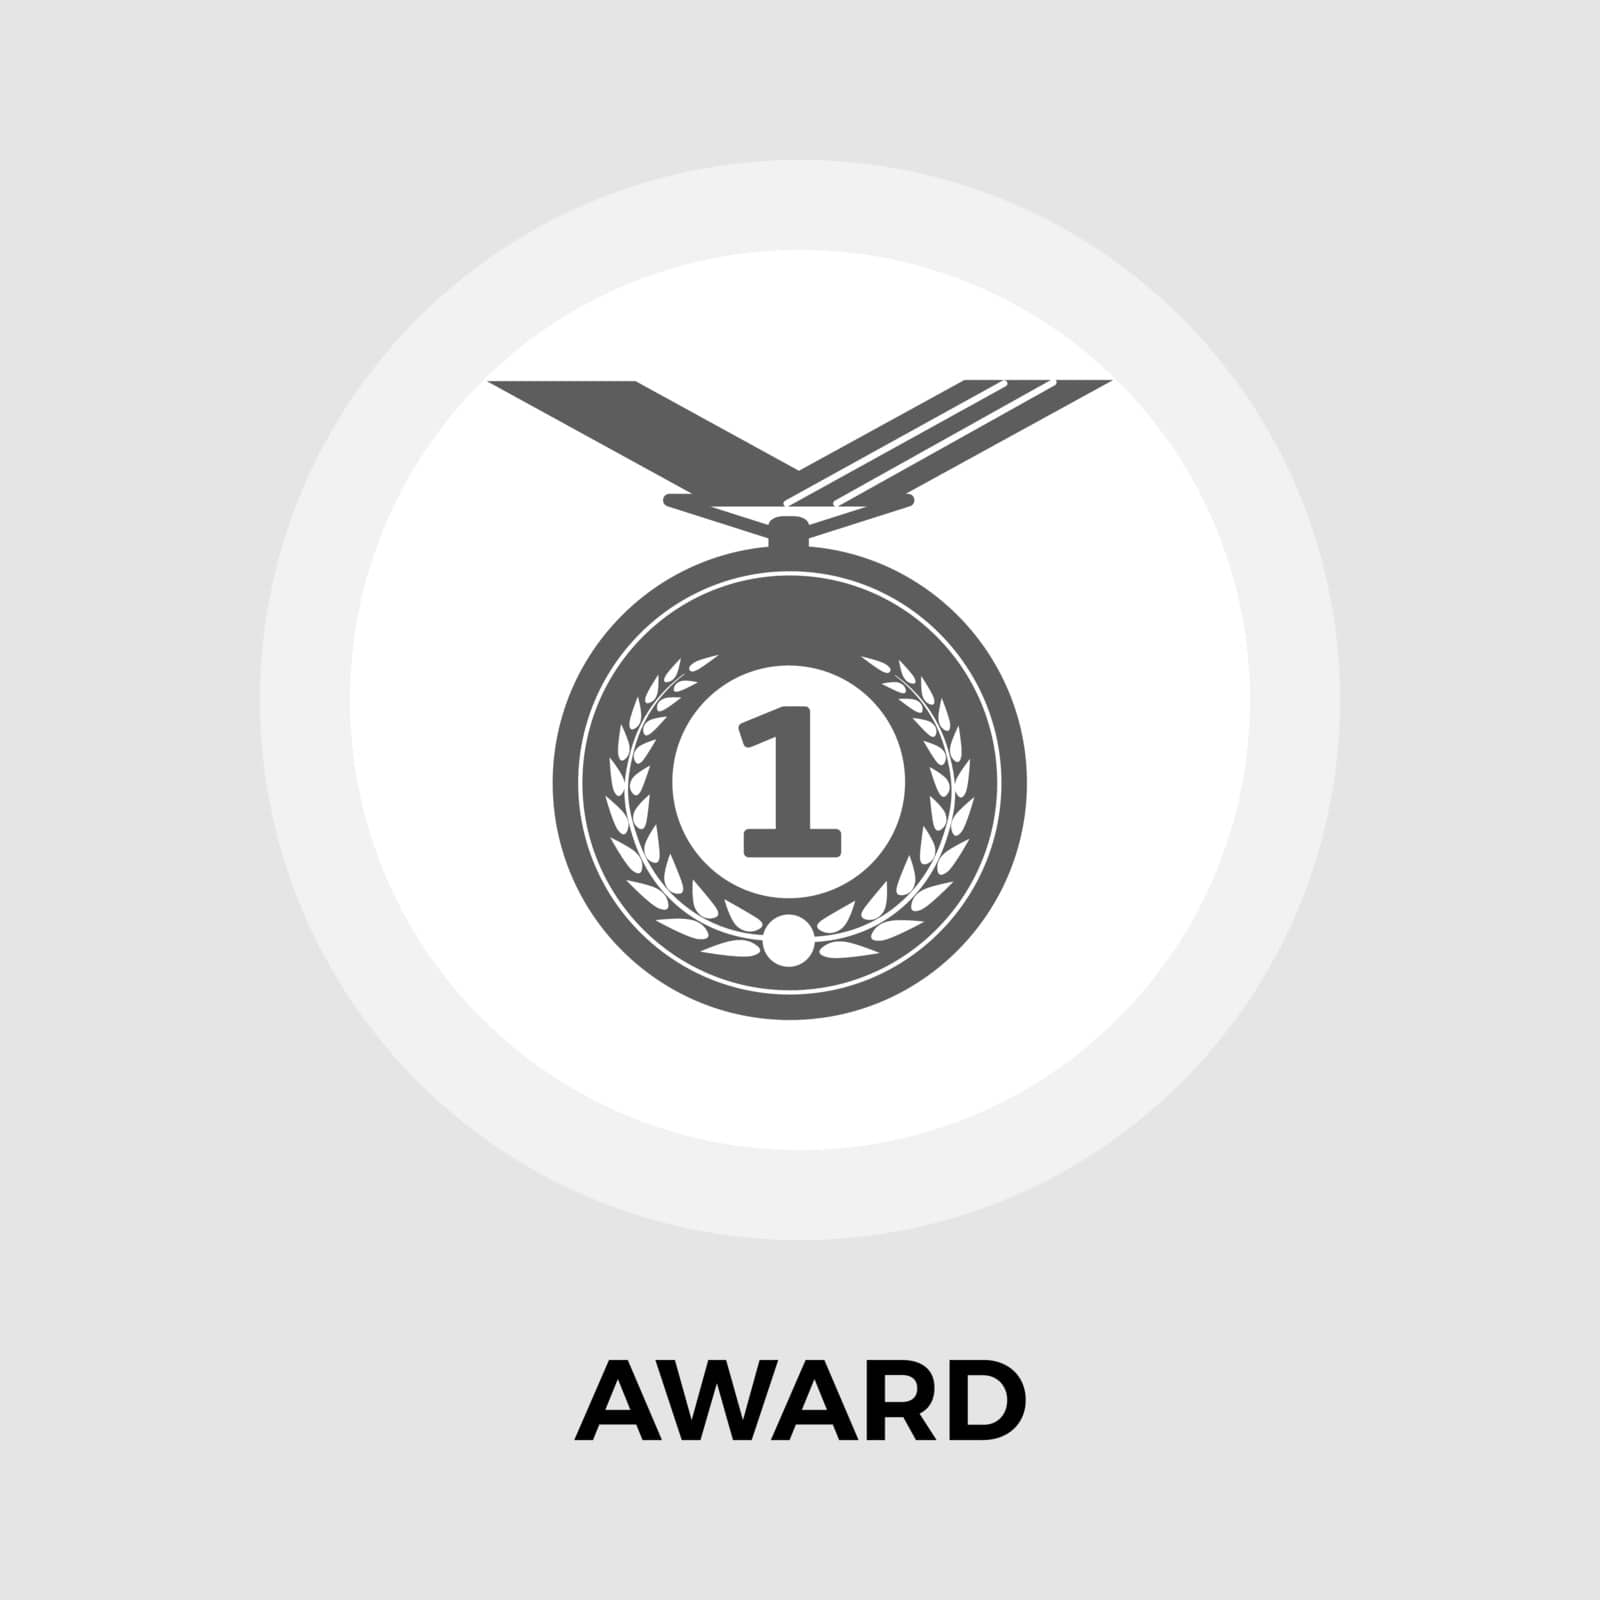 Award Icon Vector. Flat icon isolated on the white background. Editable EPS file. Vector illustration.